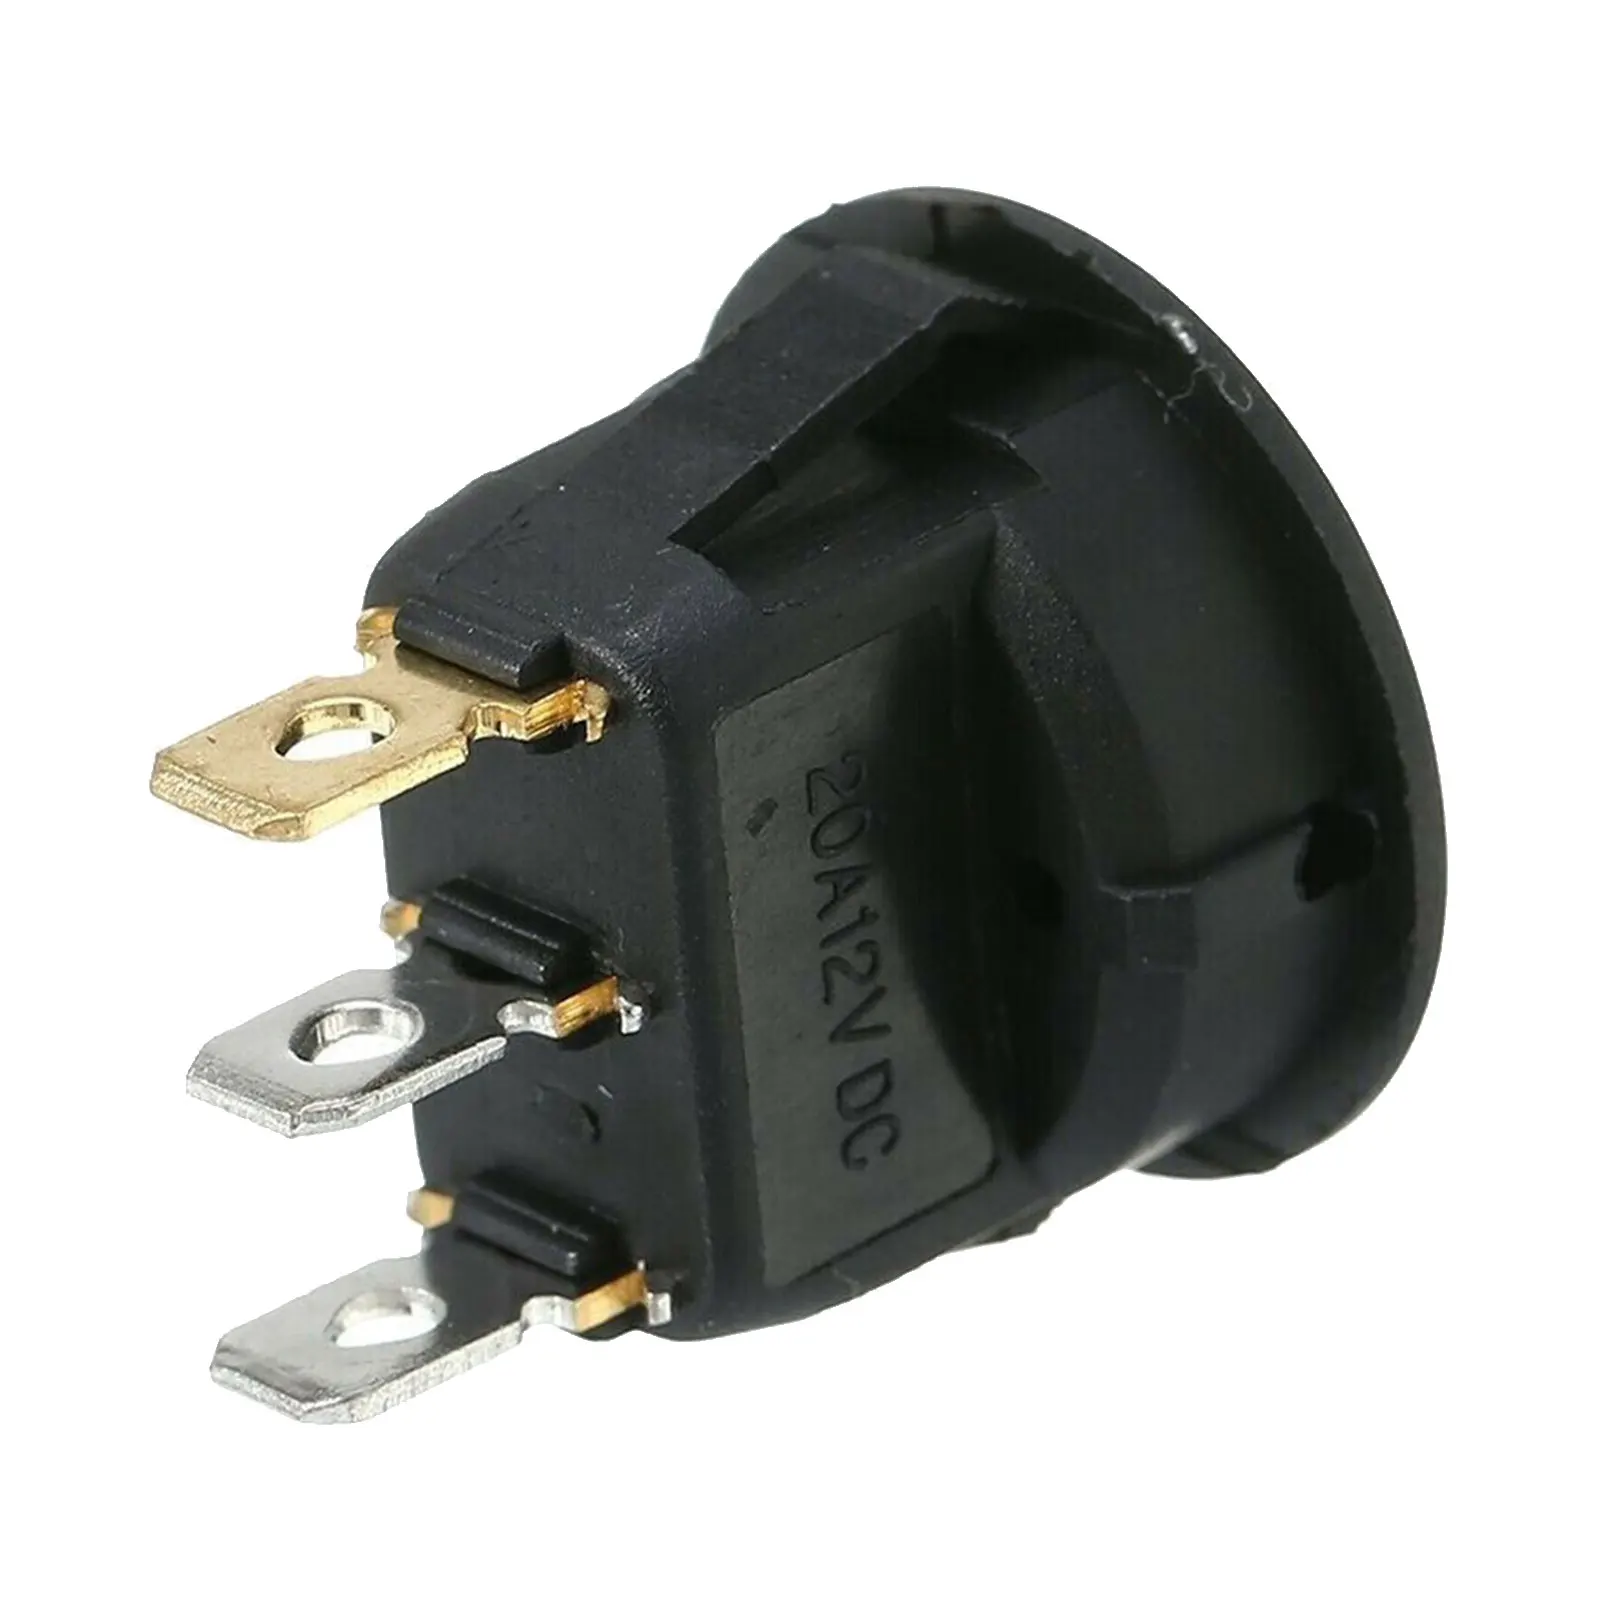 

Sensor Switch Switch Easy Installation Eye Reversing Front Rear Walking Parking Off Perfect Match 20Amp Black Brand New